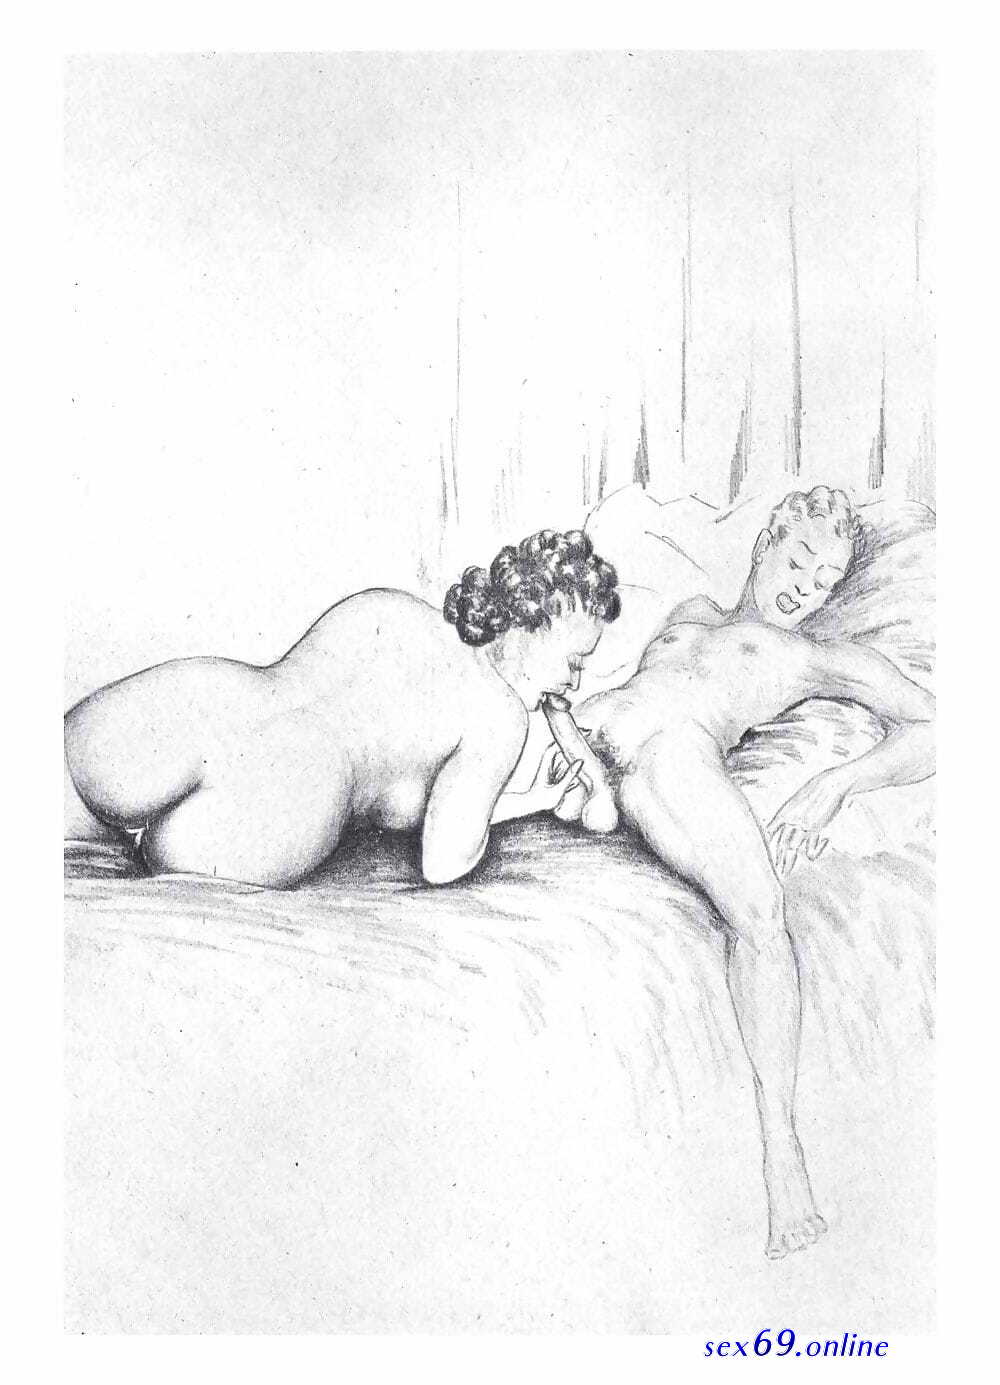 Vintage Incest Porn Drawing Cartoons - incest retro drawing galleries.net - Sexy photos